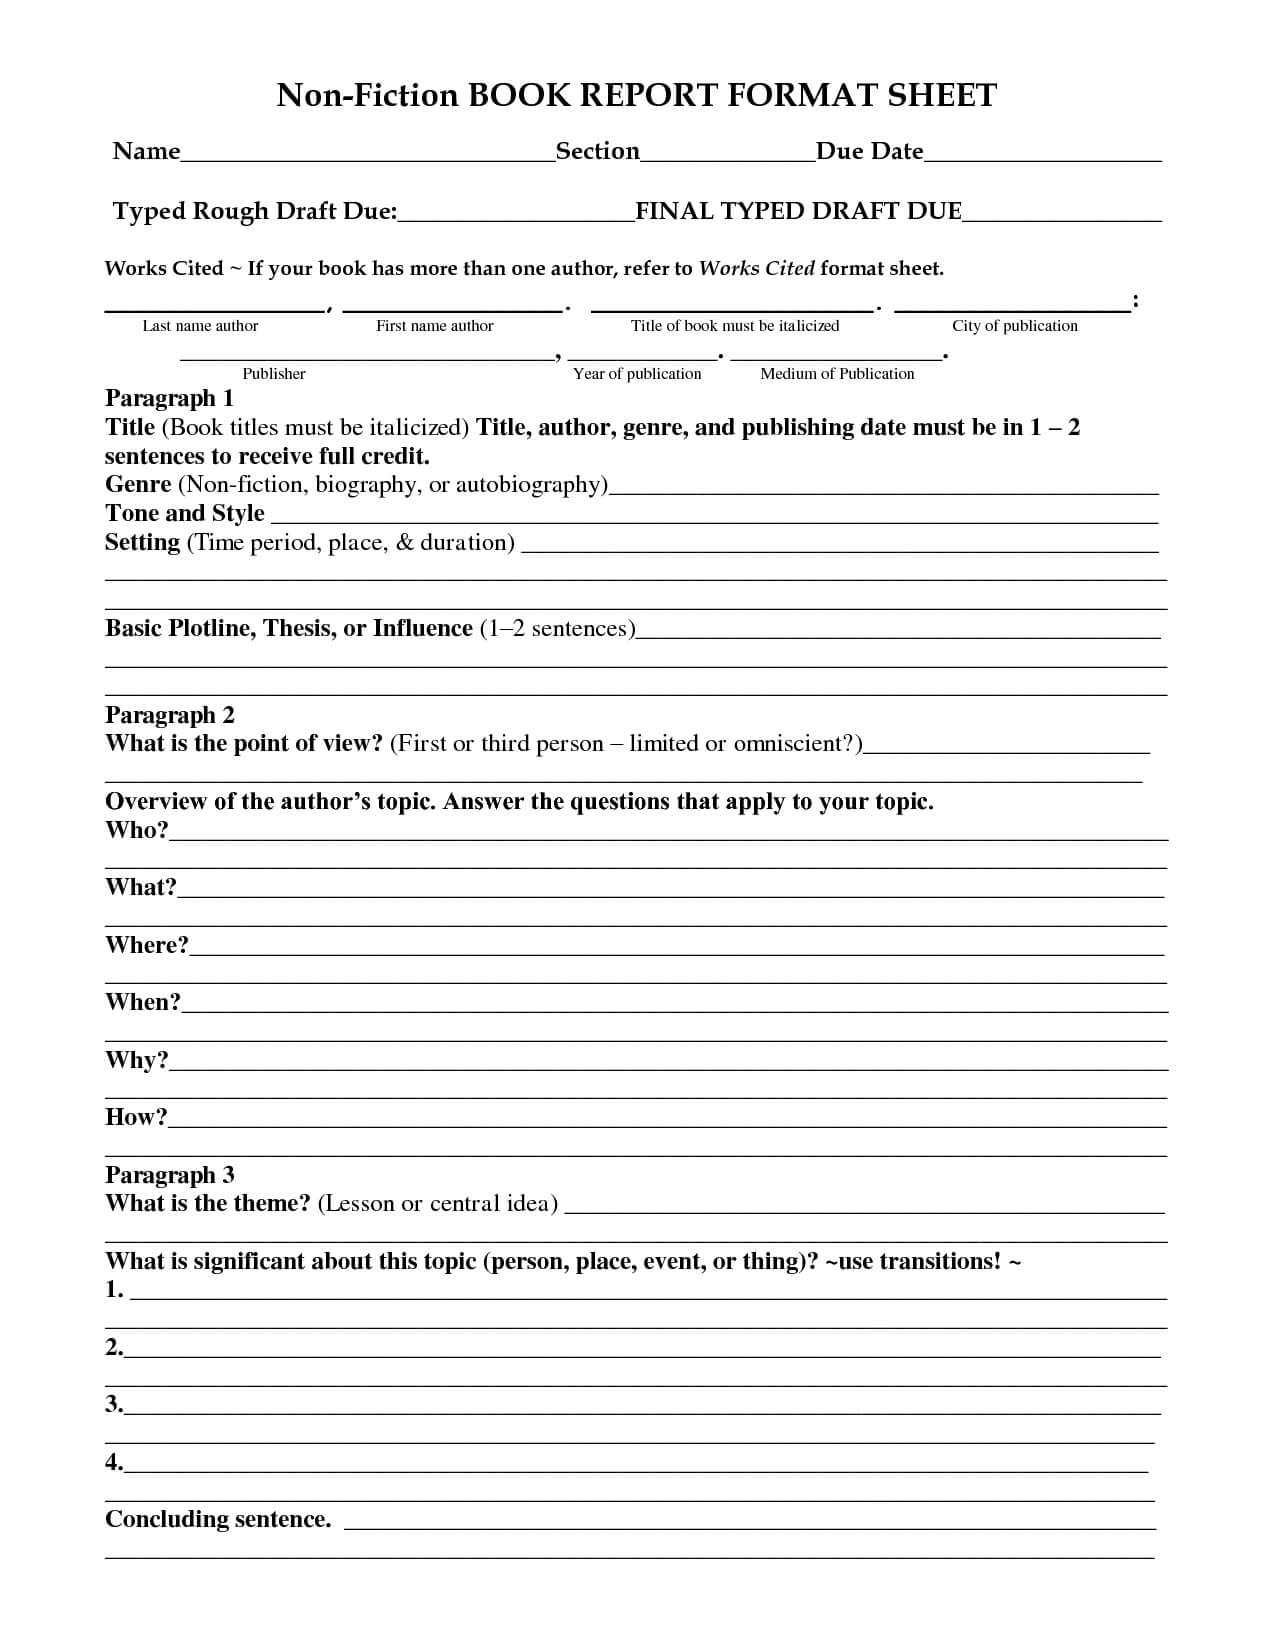 28 Images Of 5Th Grade Non Fiction Book Report Template In Nonfiction Book Report Template